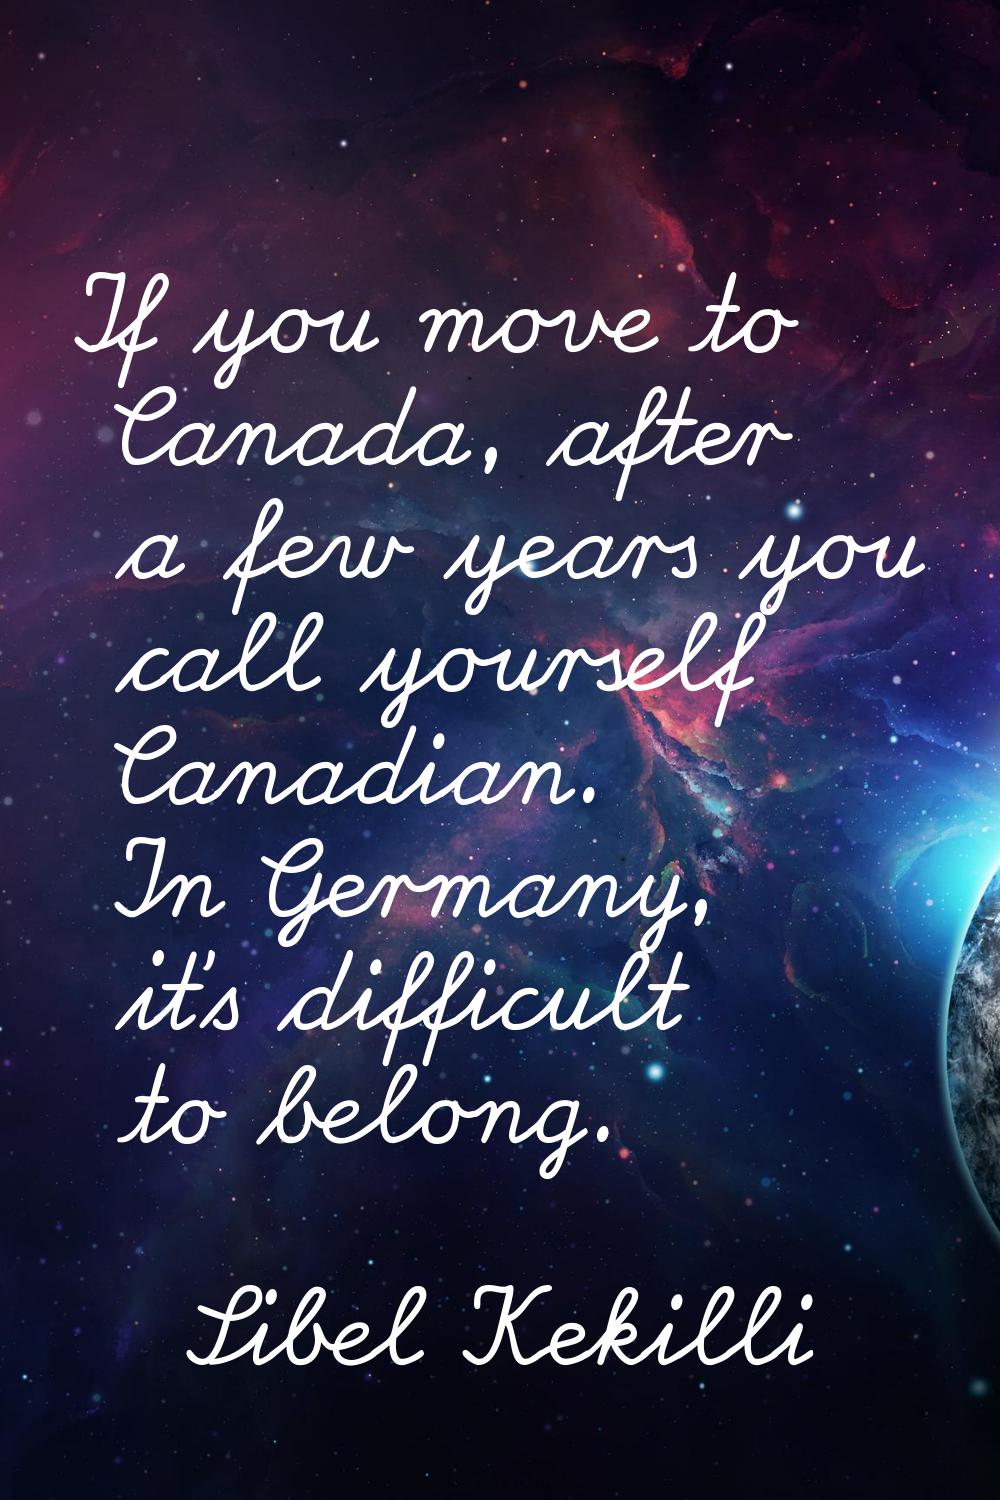 If you move to Canada, after a few years you call yourself Canadian. In Germany, it's difficult to 